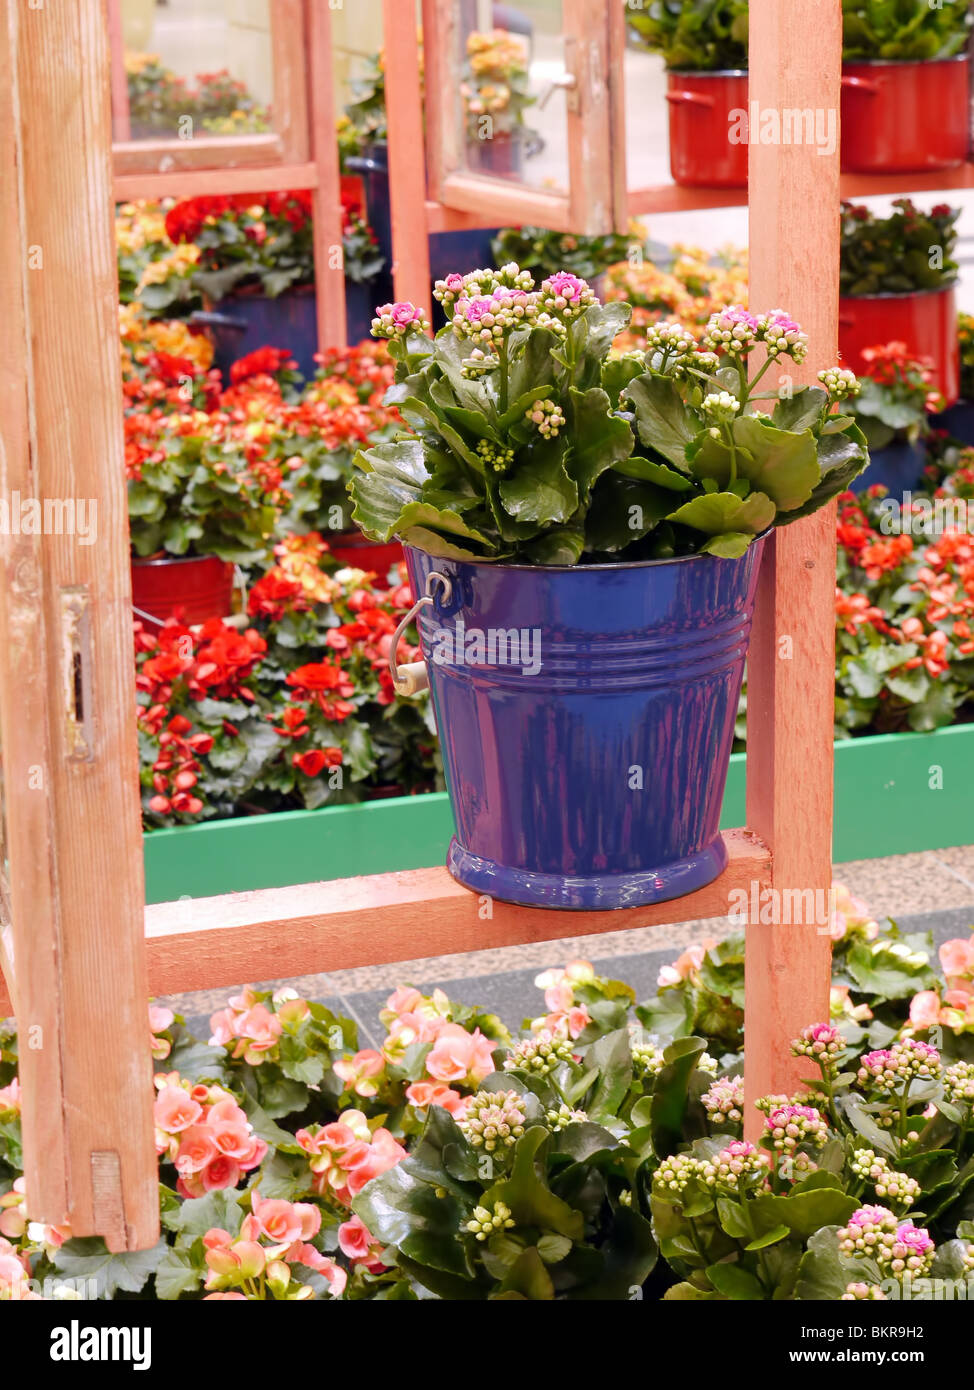 Bunch of garden flowers in metal bucket placed on wooden frame in greenhouse Stock Photo